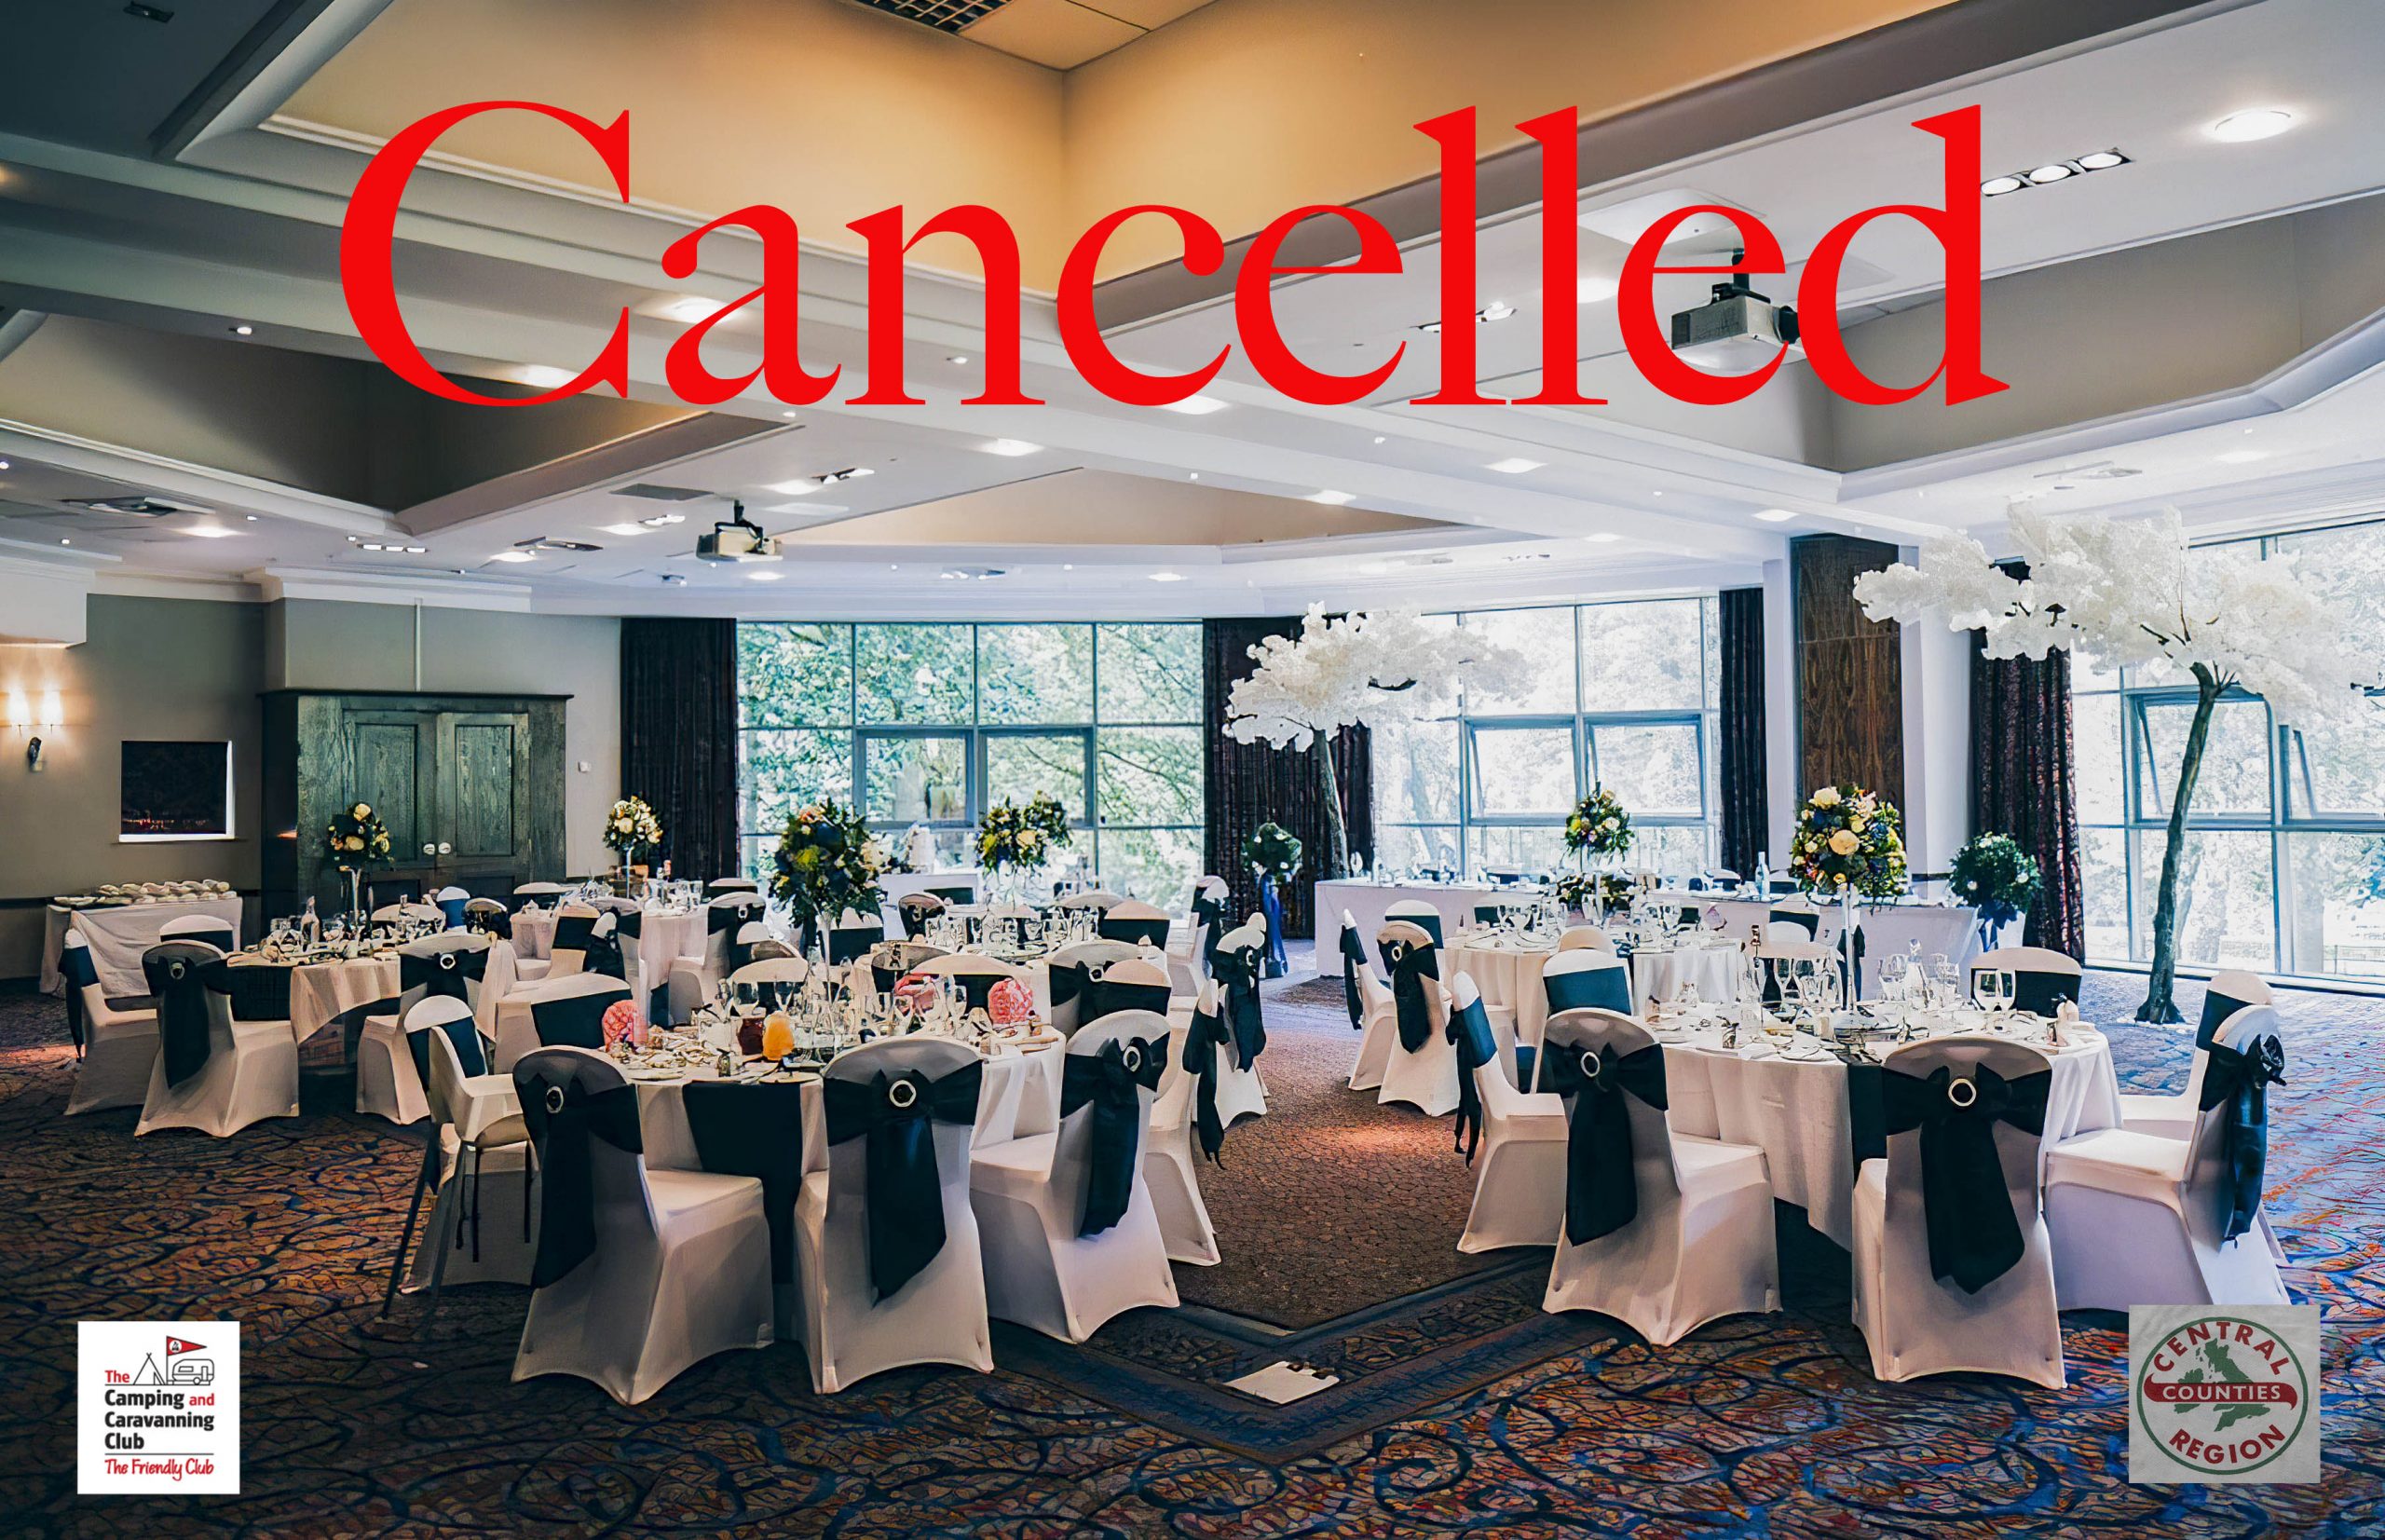 CCR Dinner Dance is Cancelled